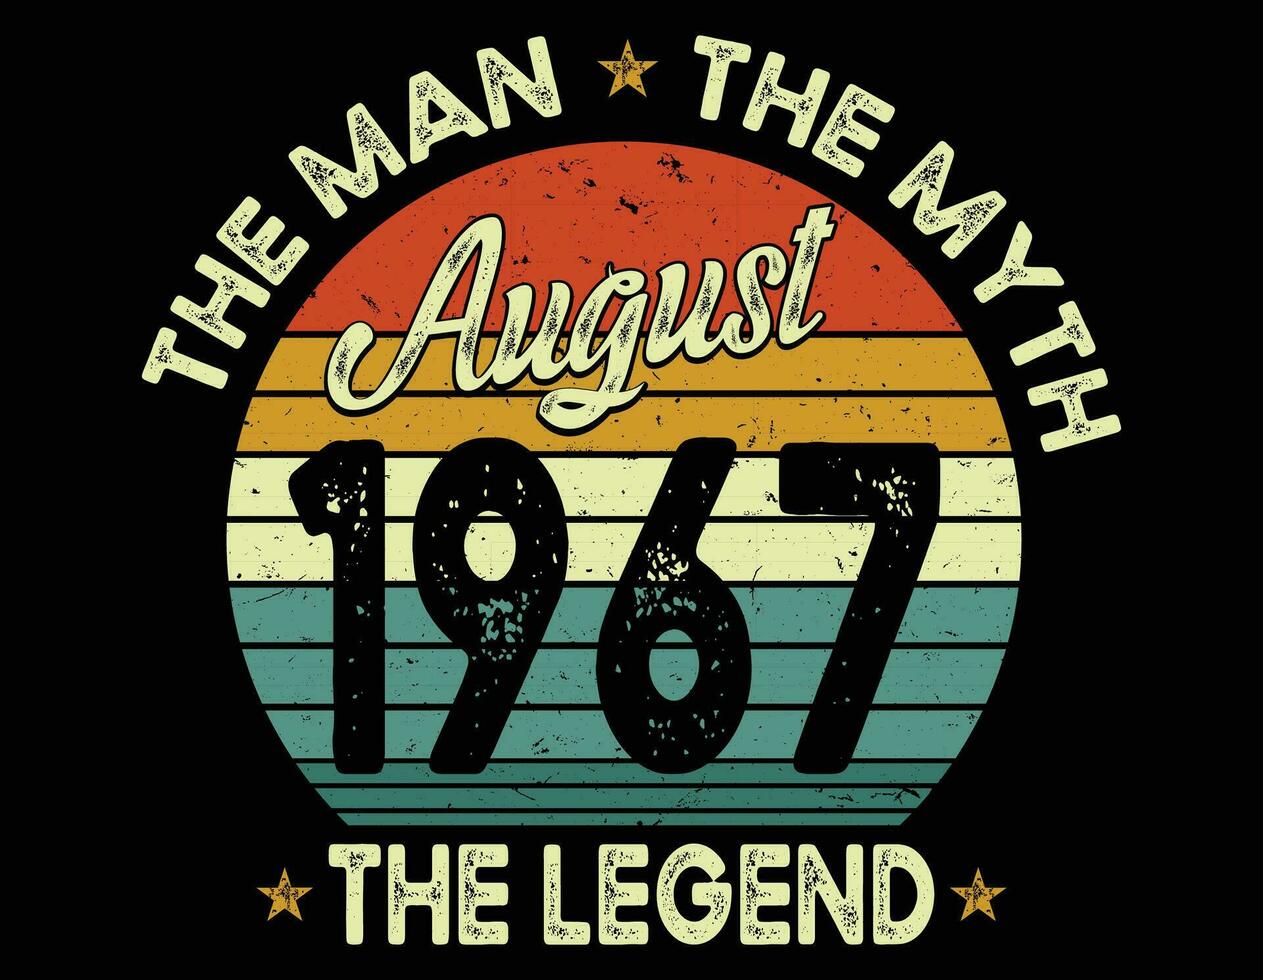 The man the myth August the legend- Fathers day t-shirt design. vector